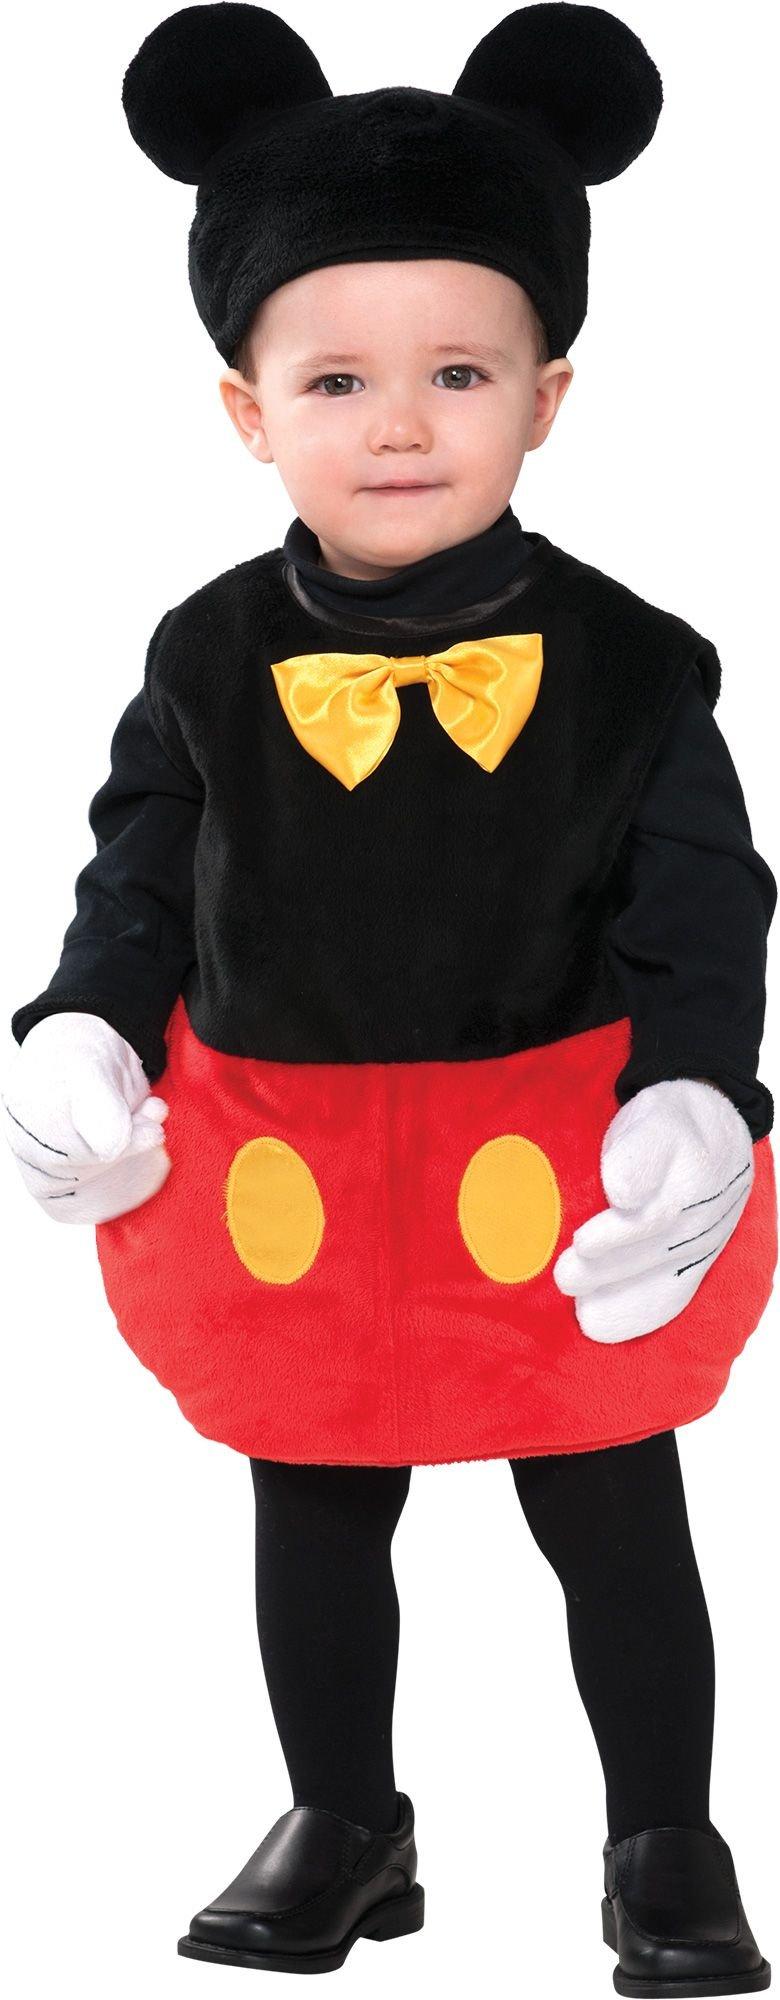 mickey mouse costume for women